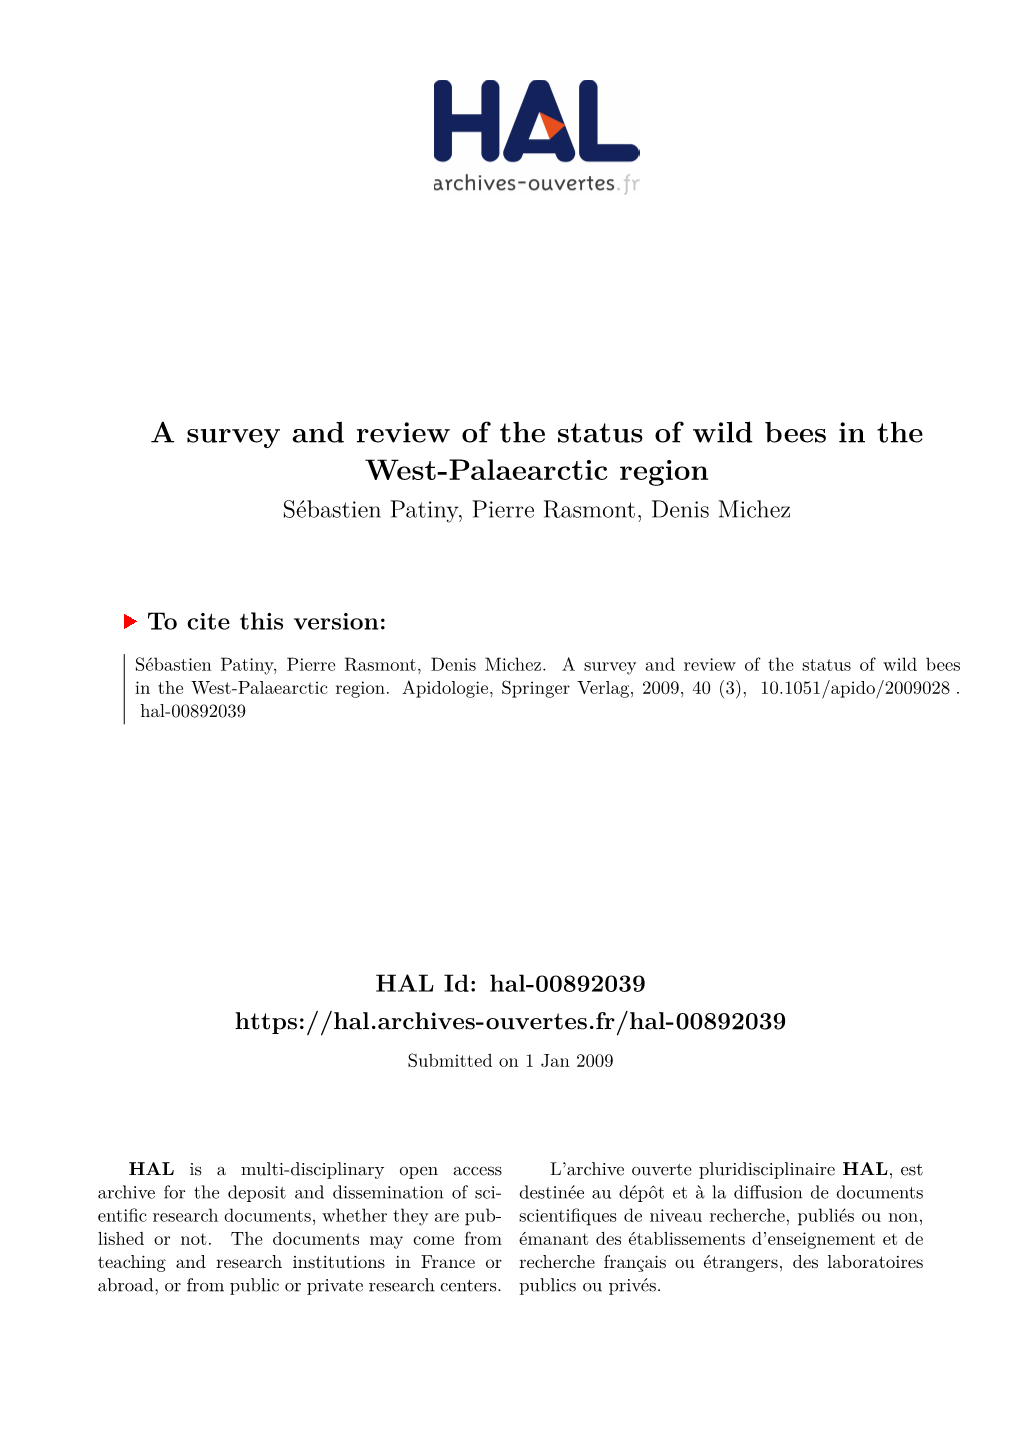 A Survey and Review of the Status of Wild Bees in the West-Palaearctic Region Sébastien Patiny, Pierre Rasmont, Denis Michez